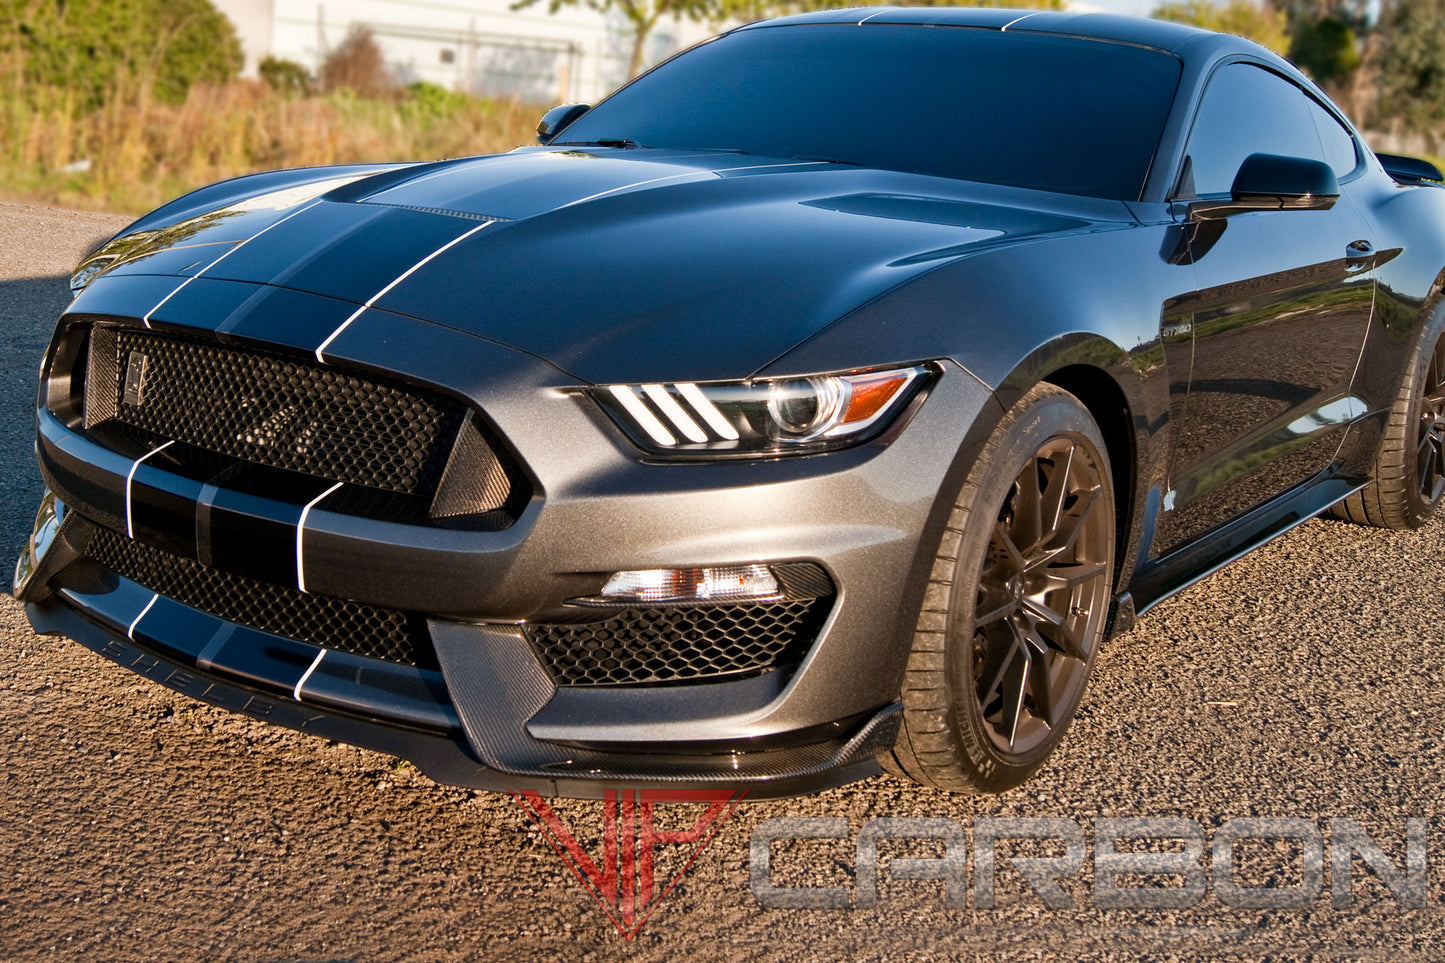 Carbon Fiber GT350 Radiator Opening Molding Ford Mustang 2015-2018 by California Super Coupes